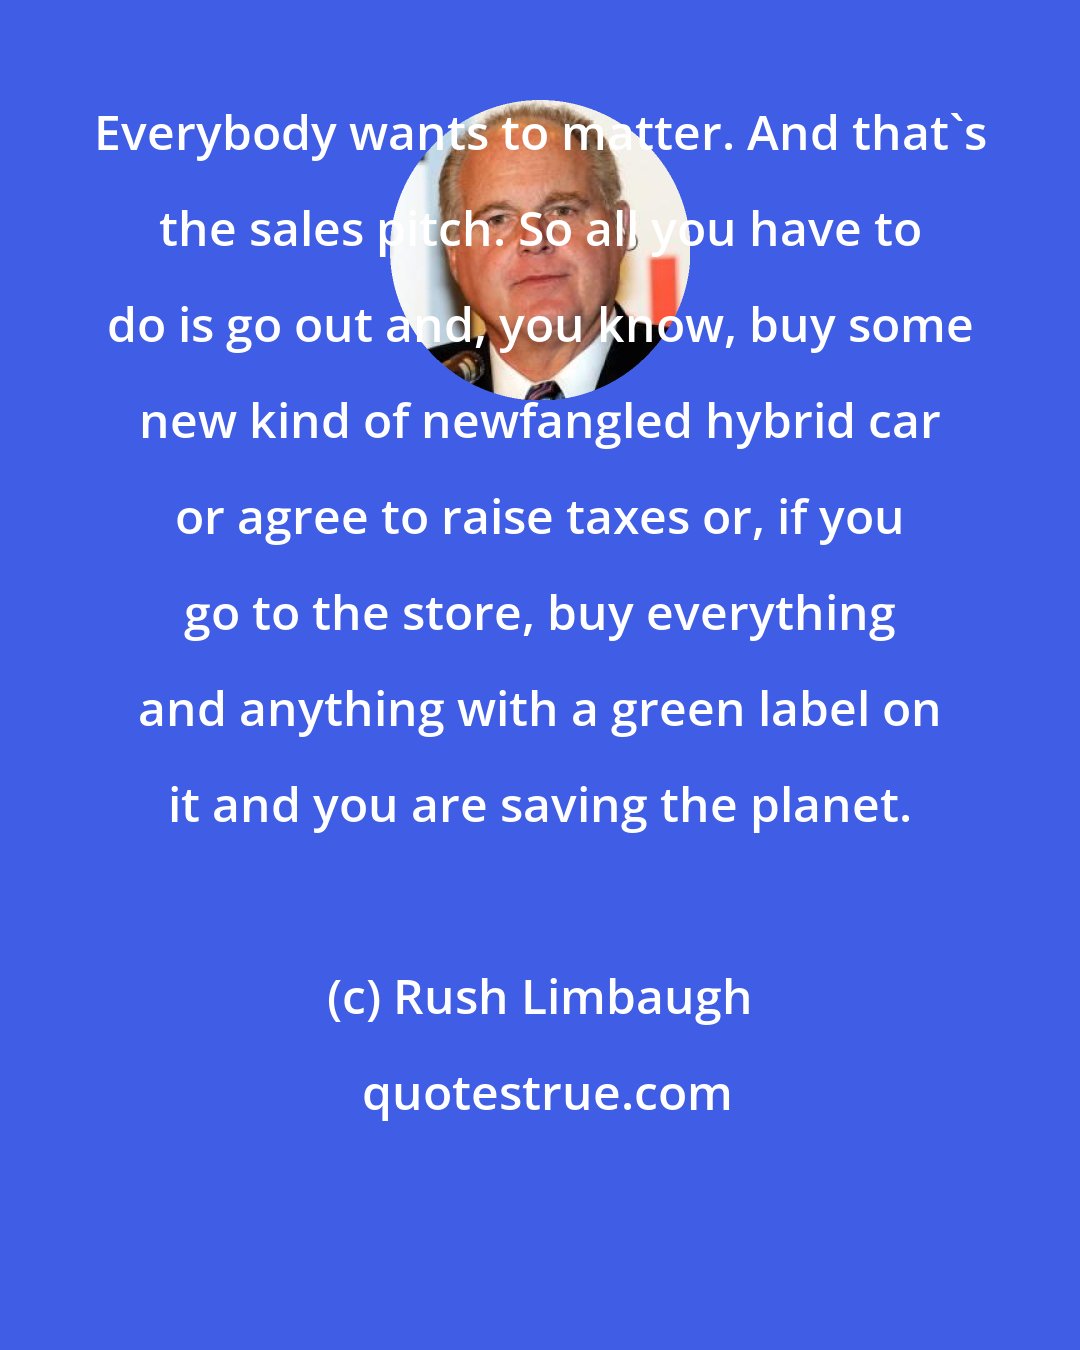 Rush Limbaugh: Everybody wants to matter. And that's the sales pitch. So all you have to do is go out and, you know, buy some new kind of newfangled hybrid car or agree to raise taxes or, if you go to the store, buy everything and anything with a green label on it and you are saving the planet.